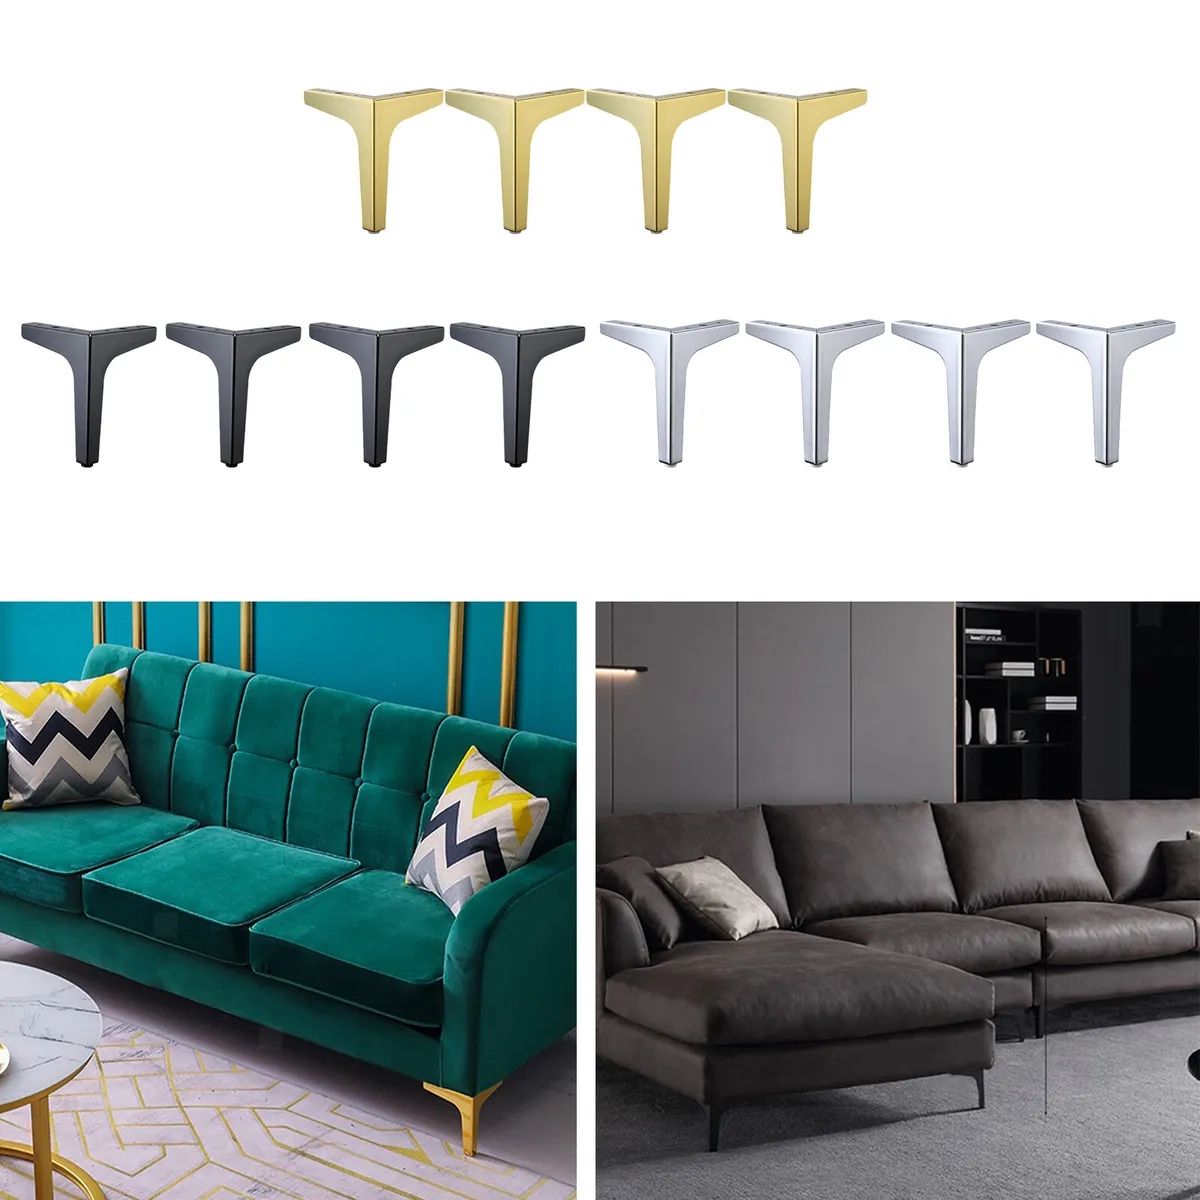 Metal Furniture Legs Sofa Loveseat Chair Sectional – Set Of 4 Black/Gold/ Chrome | Ebay Within Chrome Metal Legs Sofas (View 10 of 15)